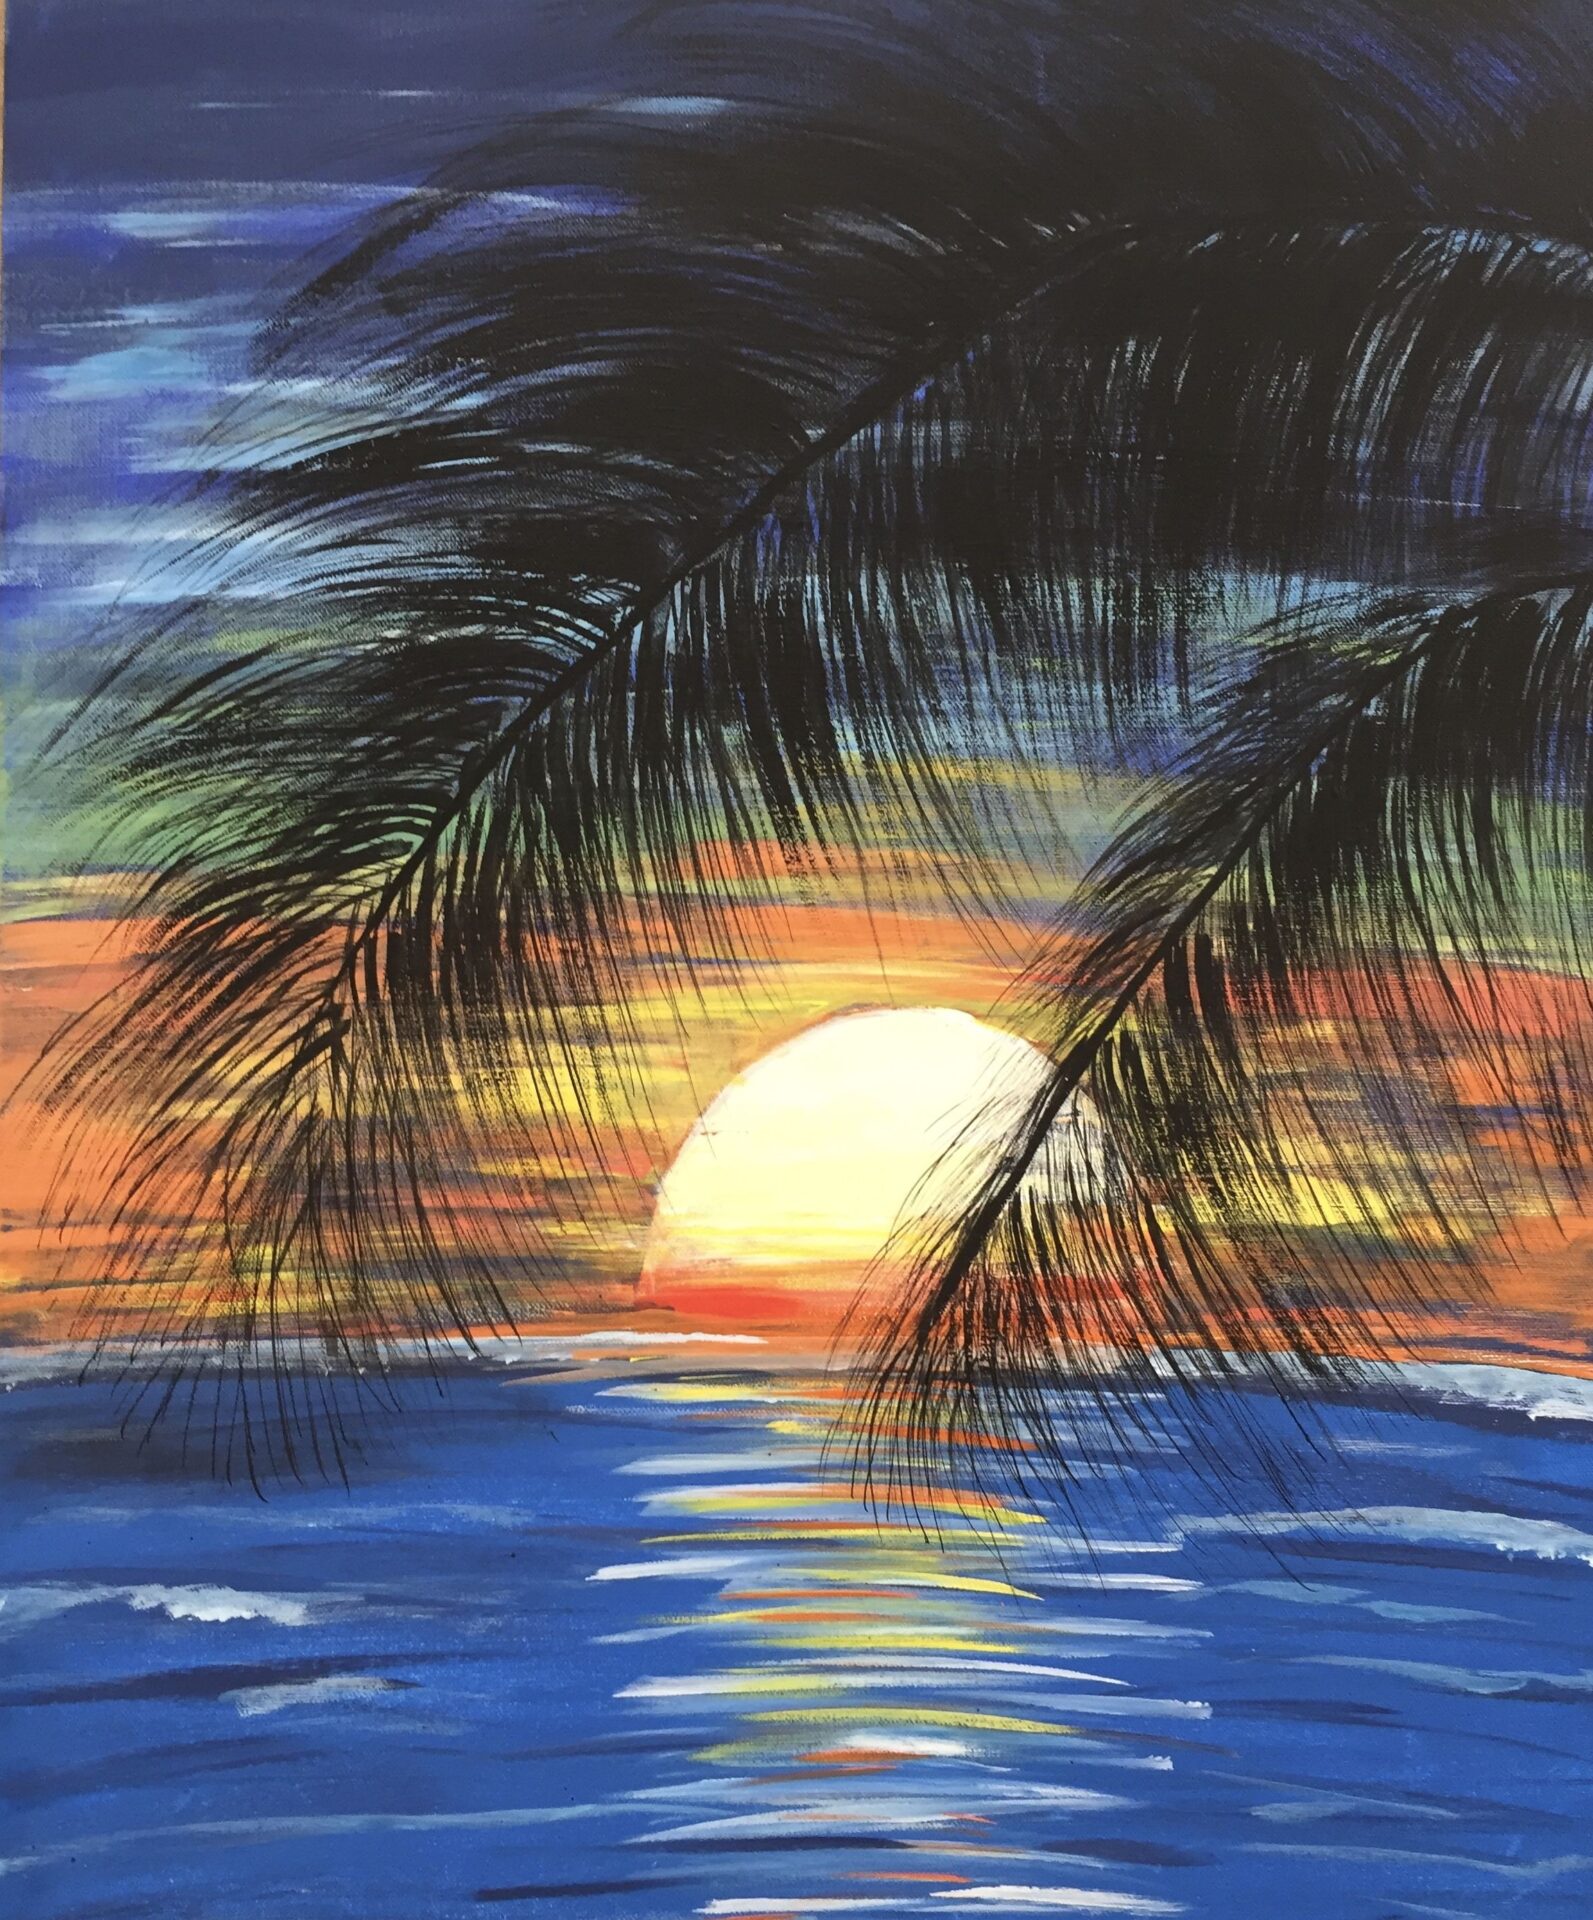 Palm Tree Sunset from uptown paint and sip painting classes in Jupiter FL